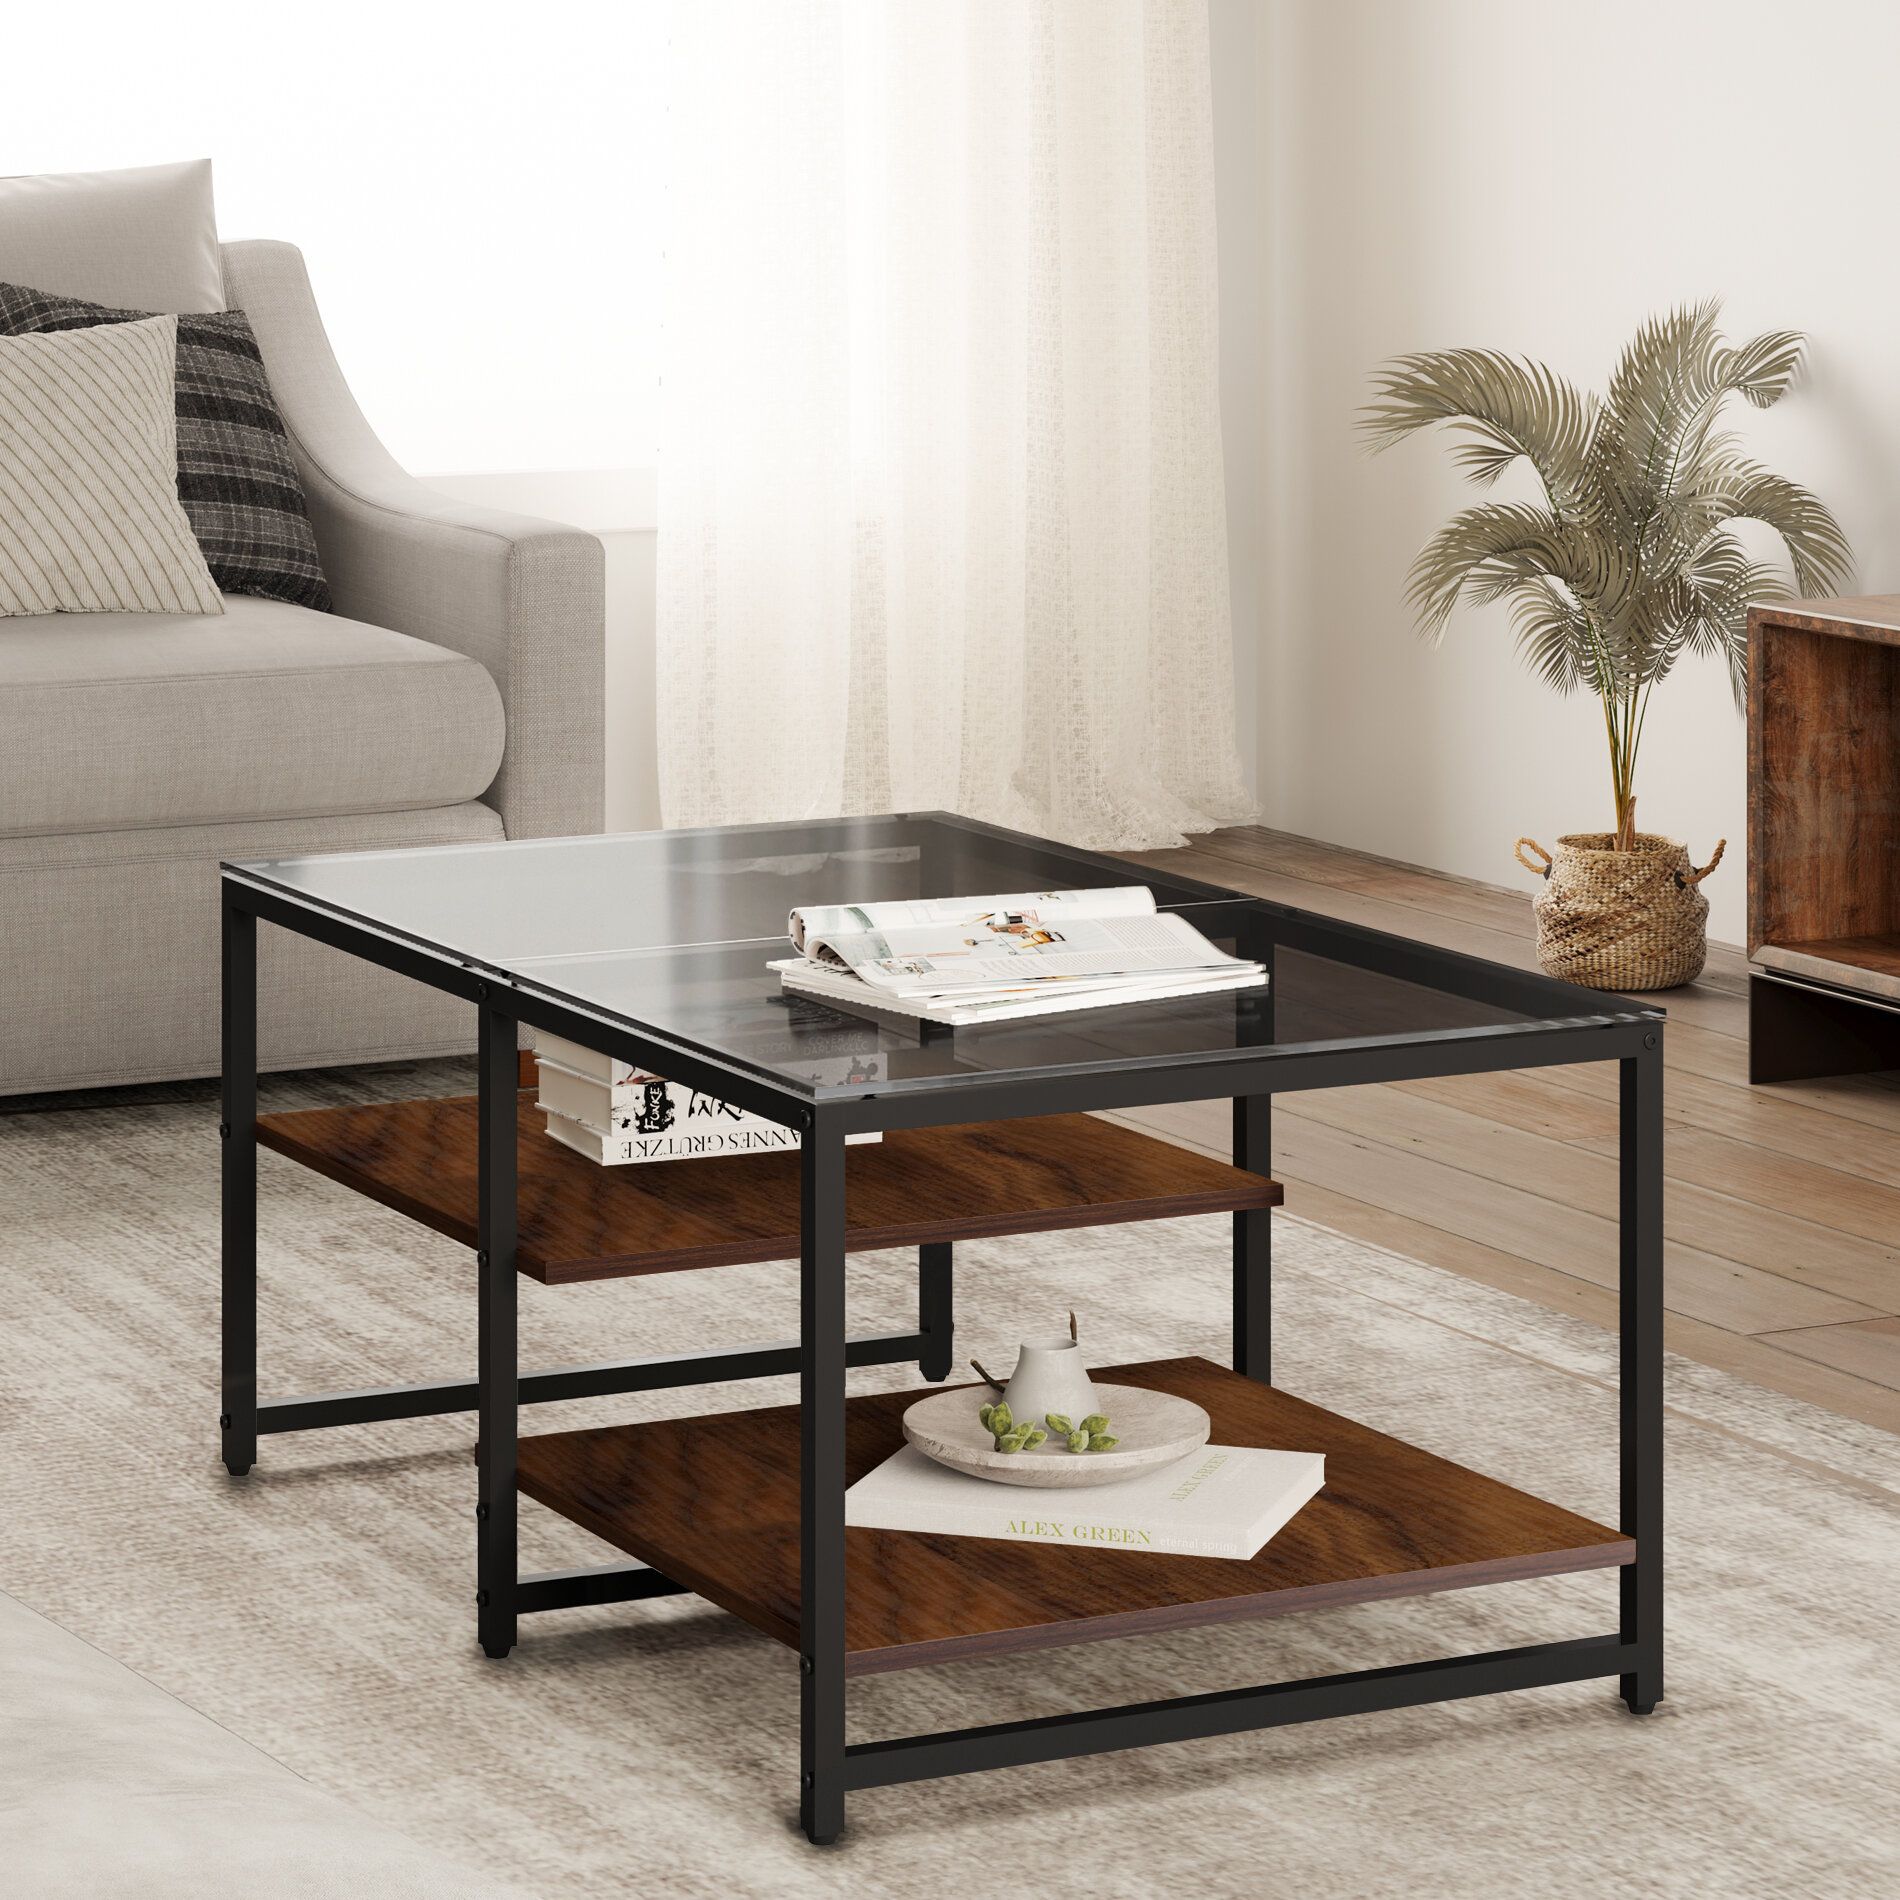 17 Stories Keian Morden Glass Coffee Table With Storage Shelf Shelves, 39.3  X 23.6 X  (View 11 of 20)